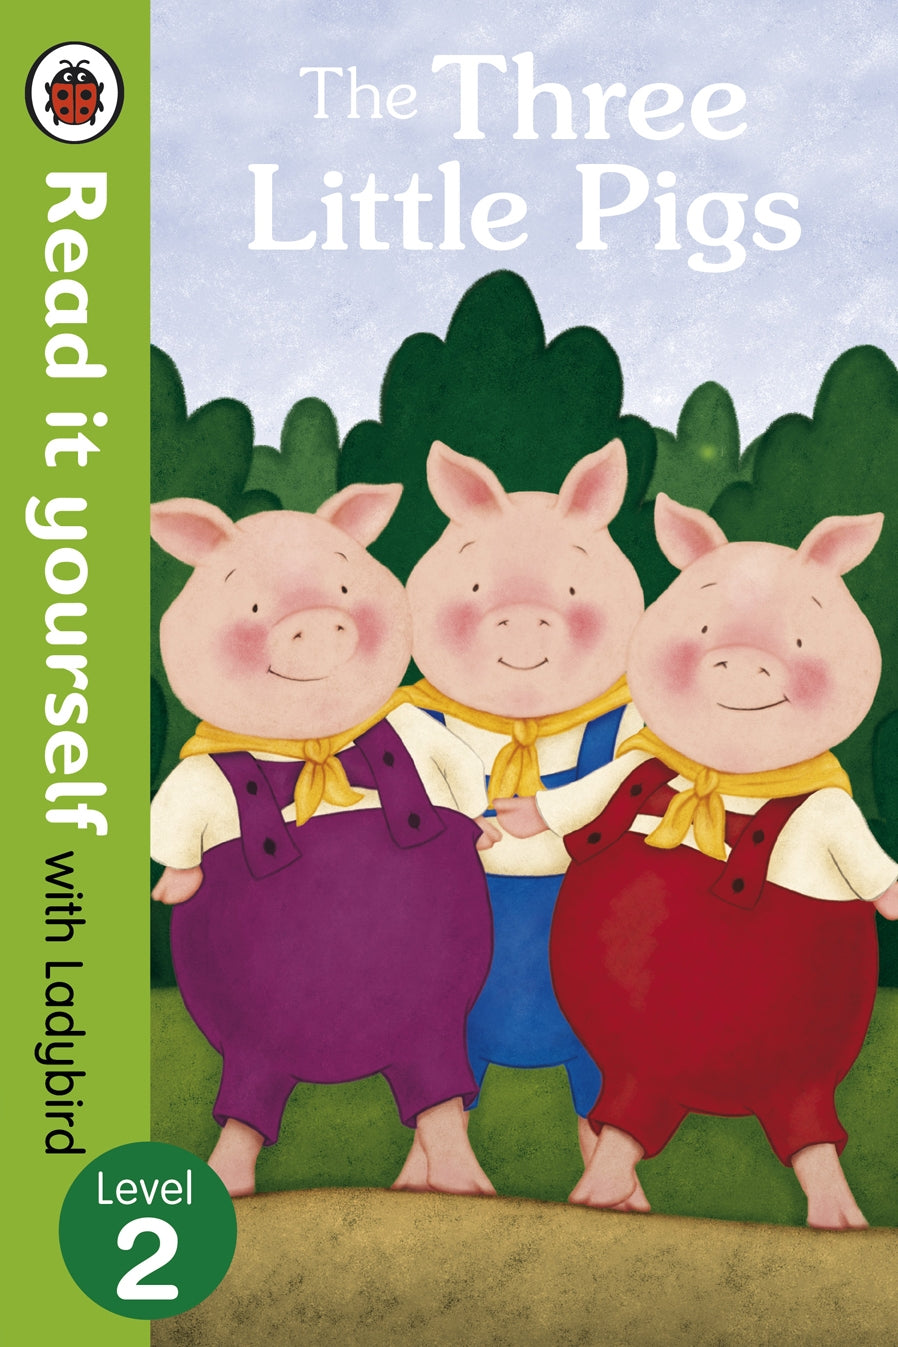 The Three Little Pigs -Read it yourself with Ladybird: Level 2